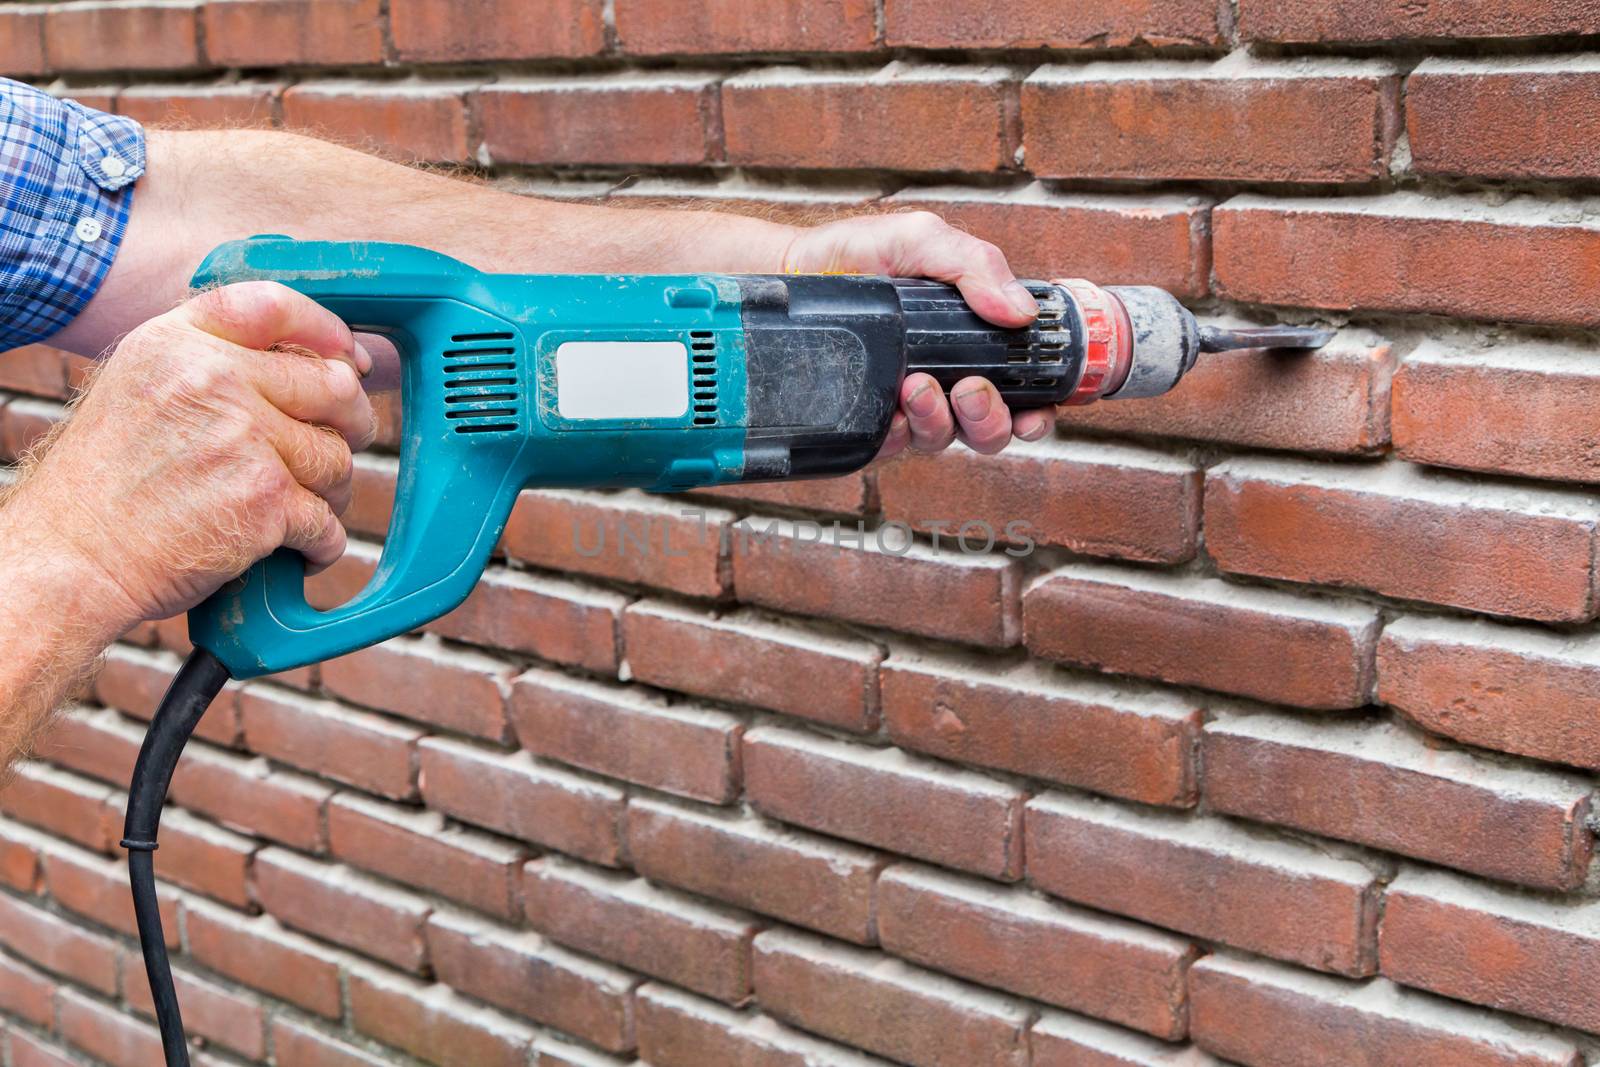 Arms holding drilling machine against brick wall by BenSchonewille